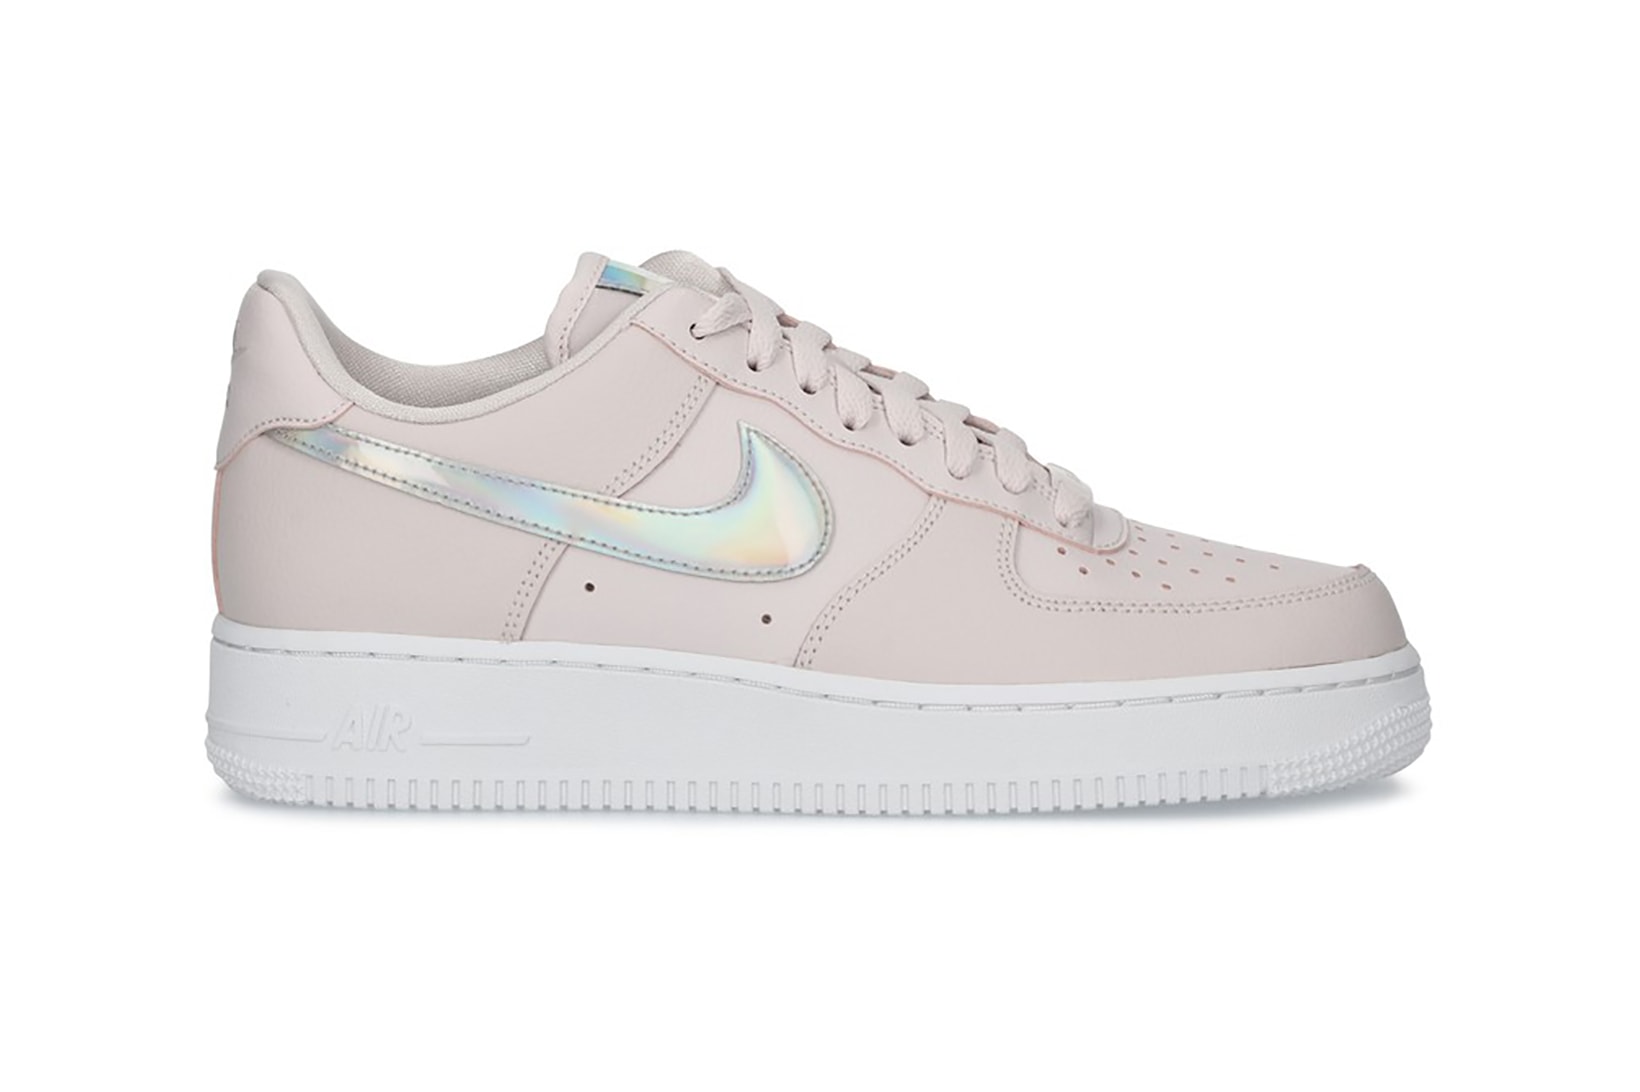 Metallic Silver Swooshes Decorate This Nike Air Force 1 Low